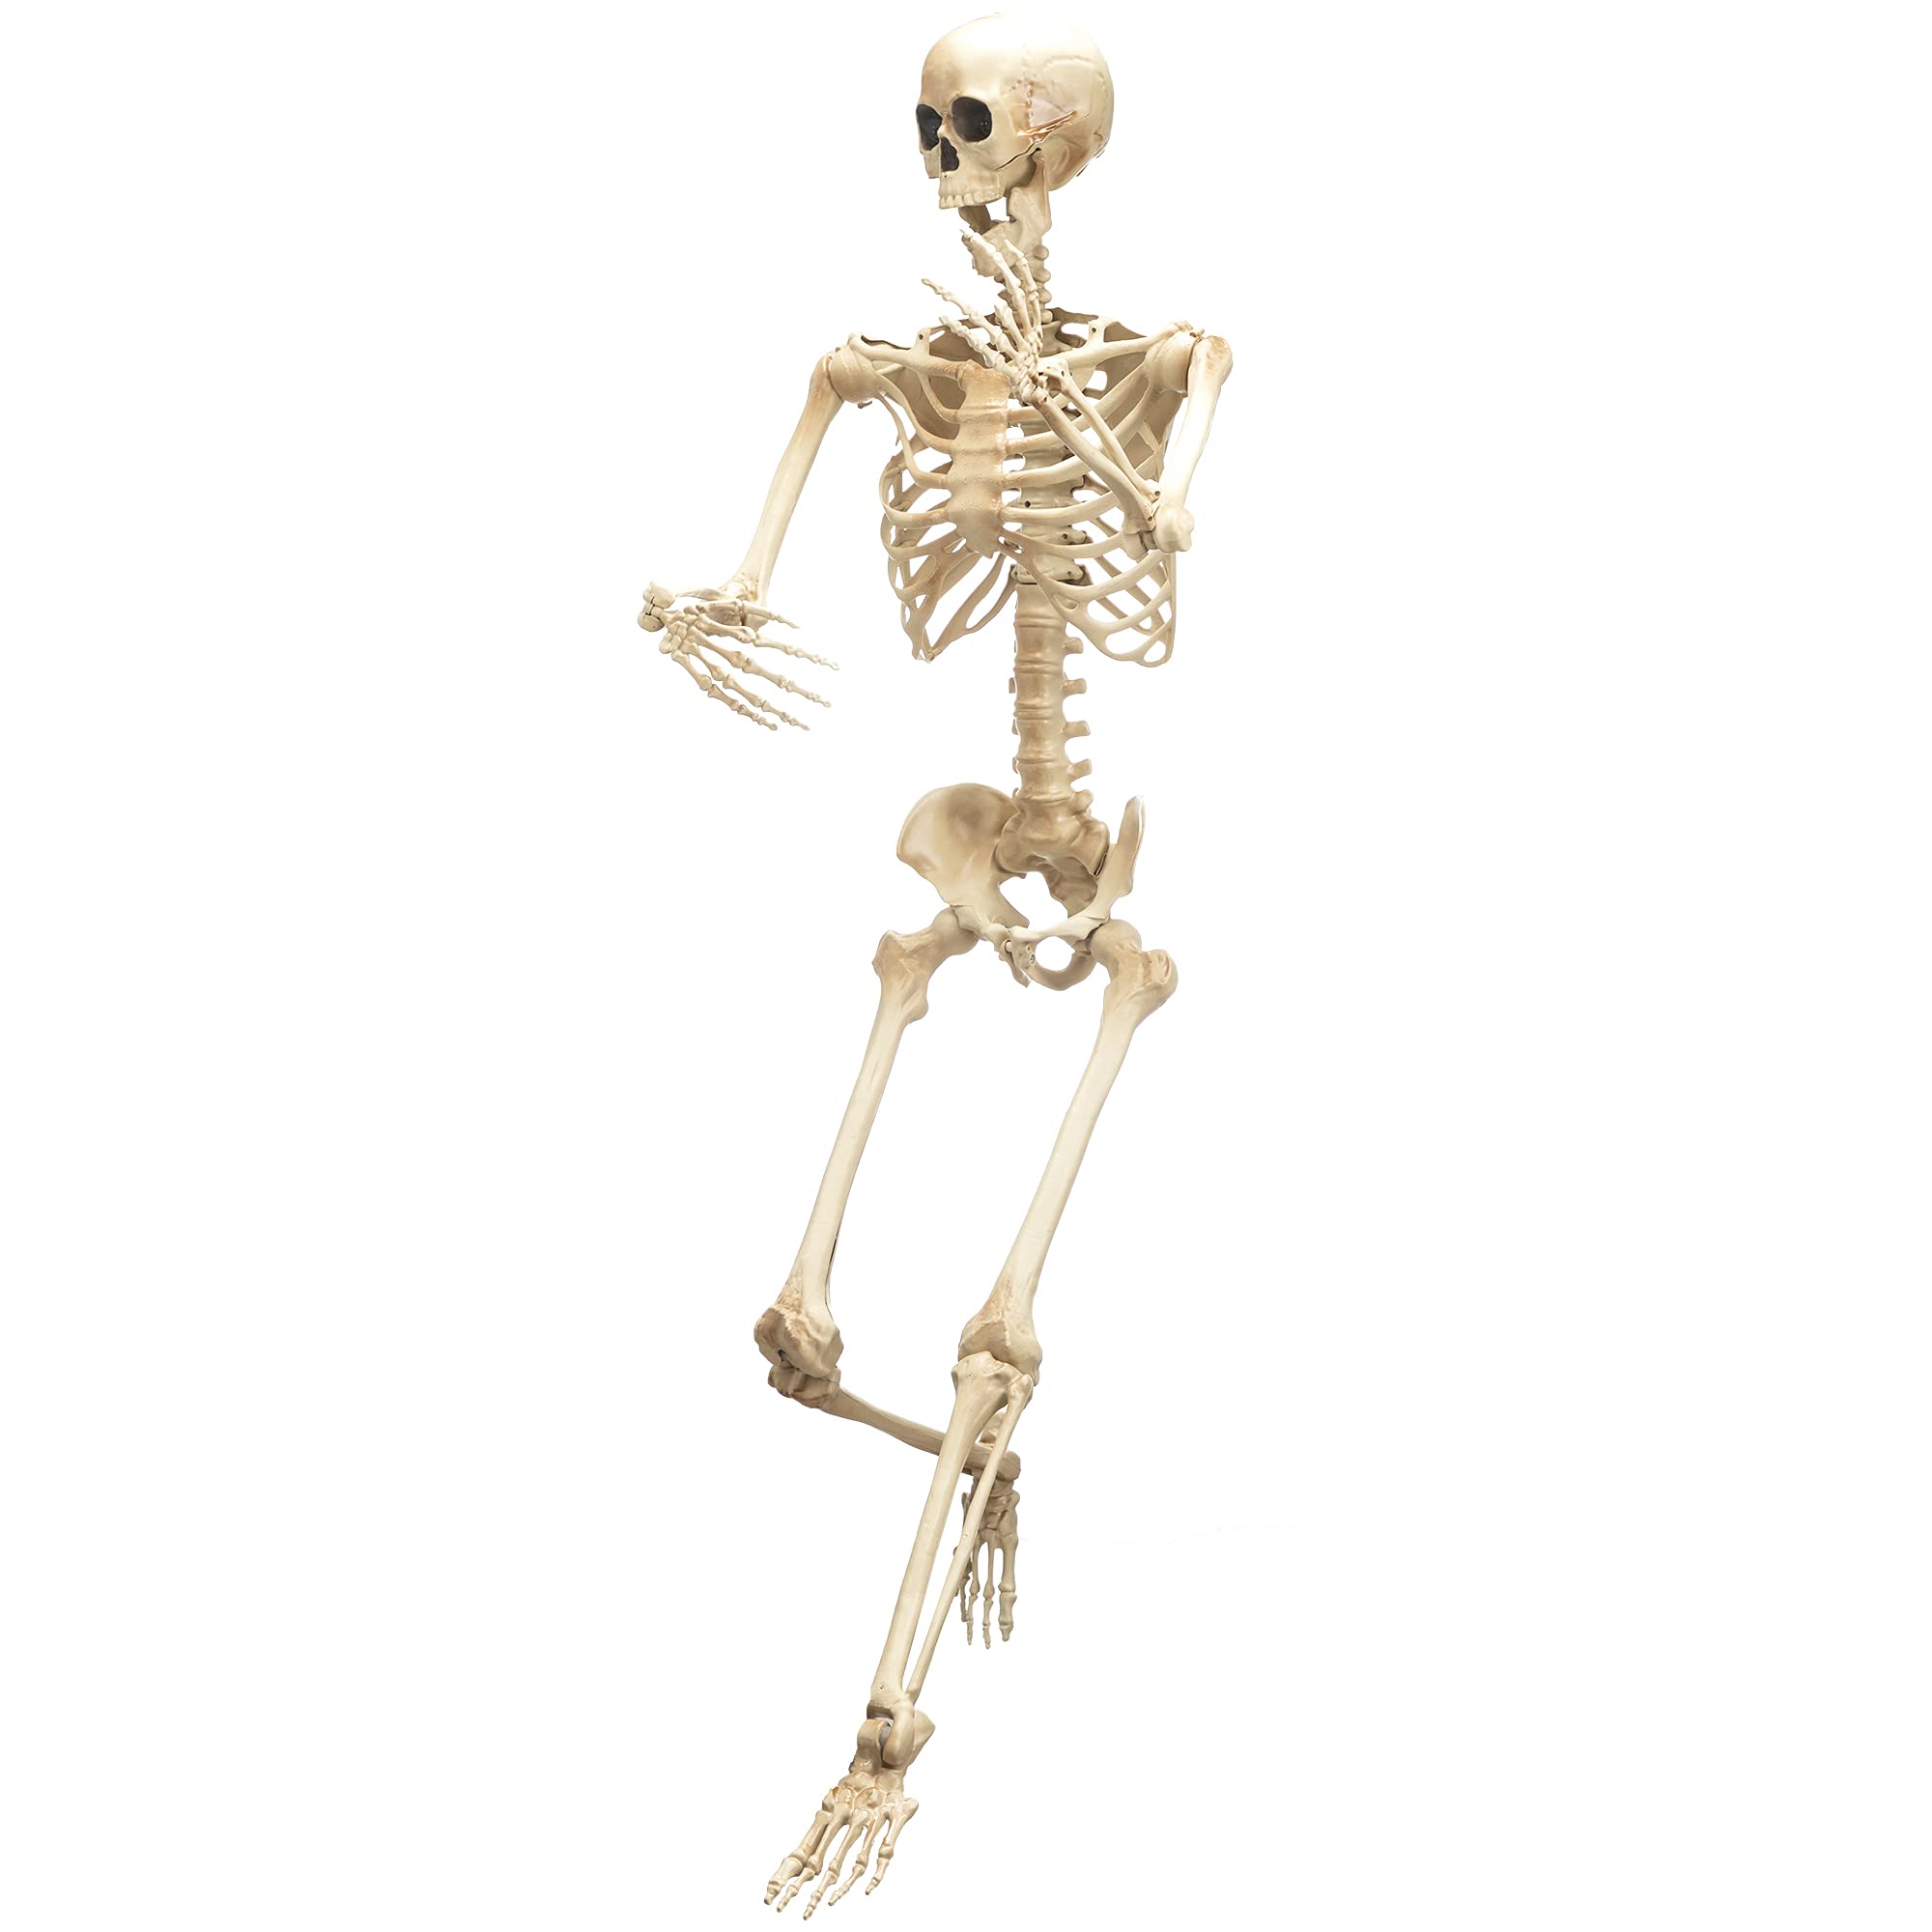 JOYIN 5 ft Halloween Life-Size Skeleton, Full Body Plastic Skeleton with Movable Joint, Human Bones for Halloween Party, Indoor and Outdoor Decorations, Haunted House or Graveyard Props